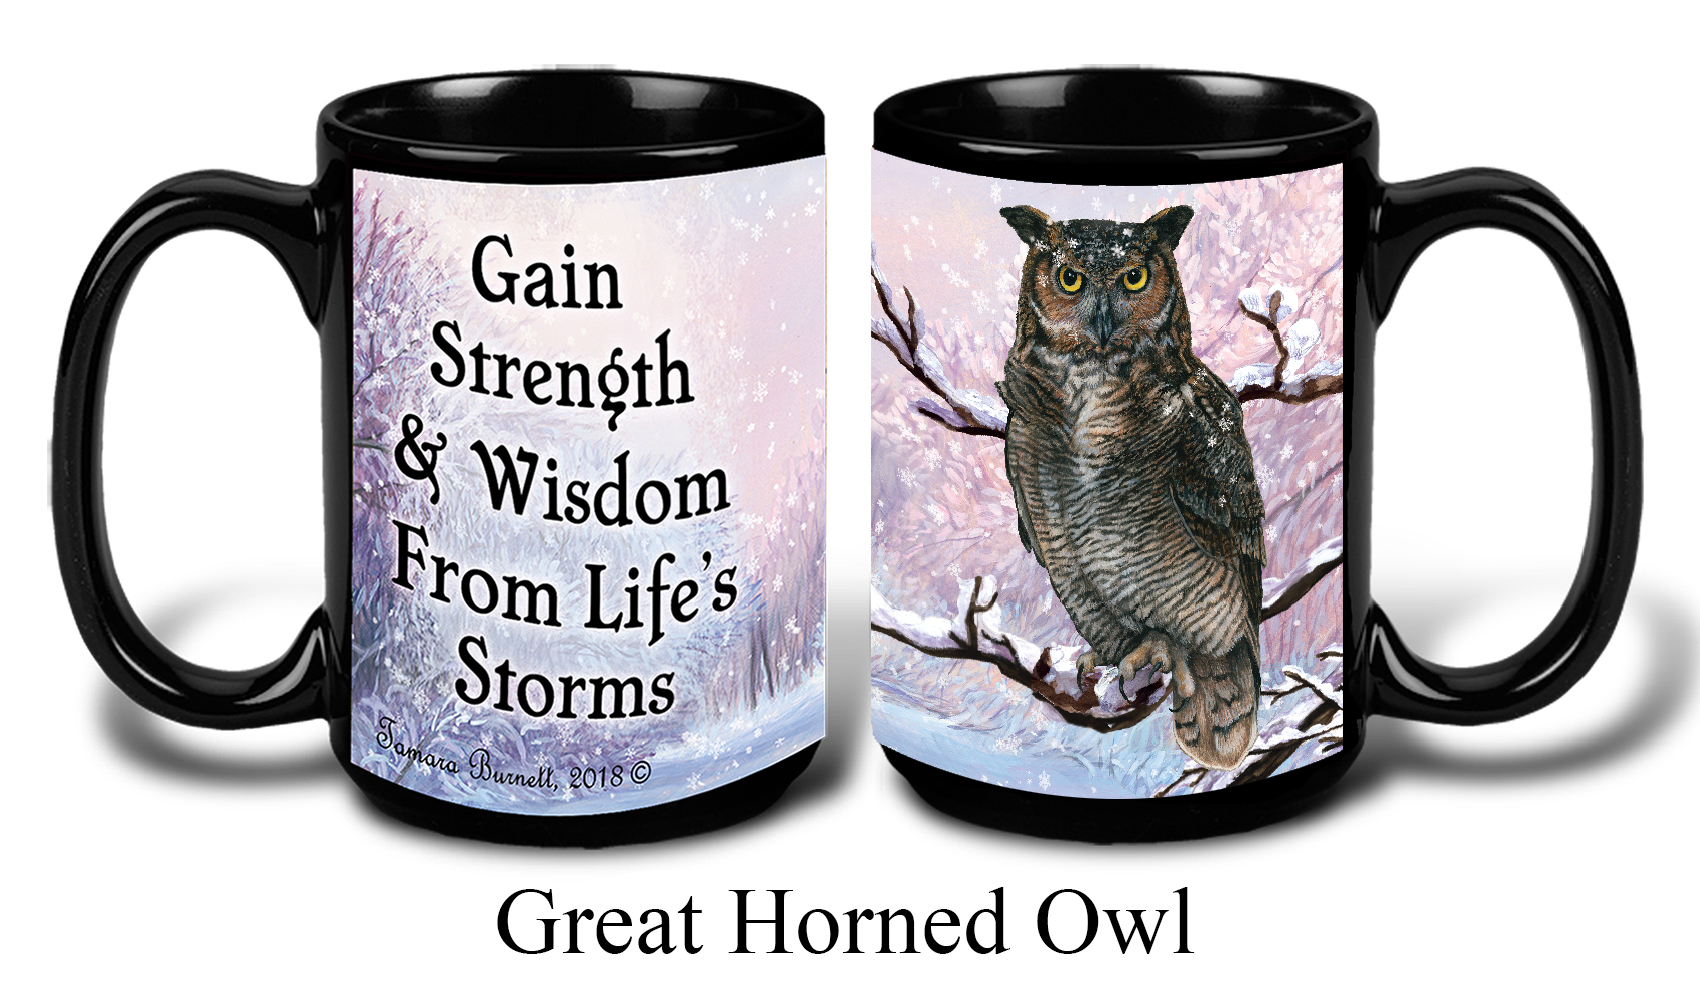 An image of the Great Horned Owl Winter Mugs